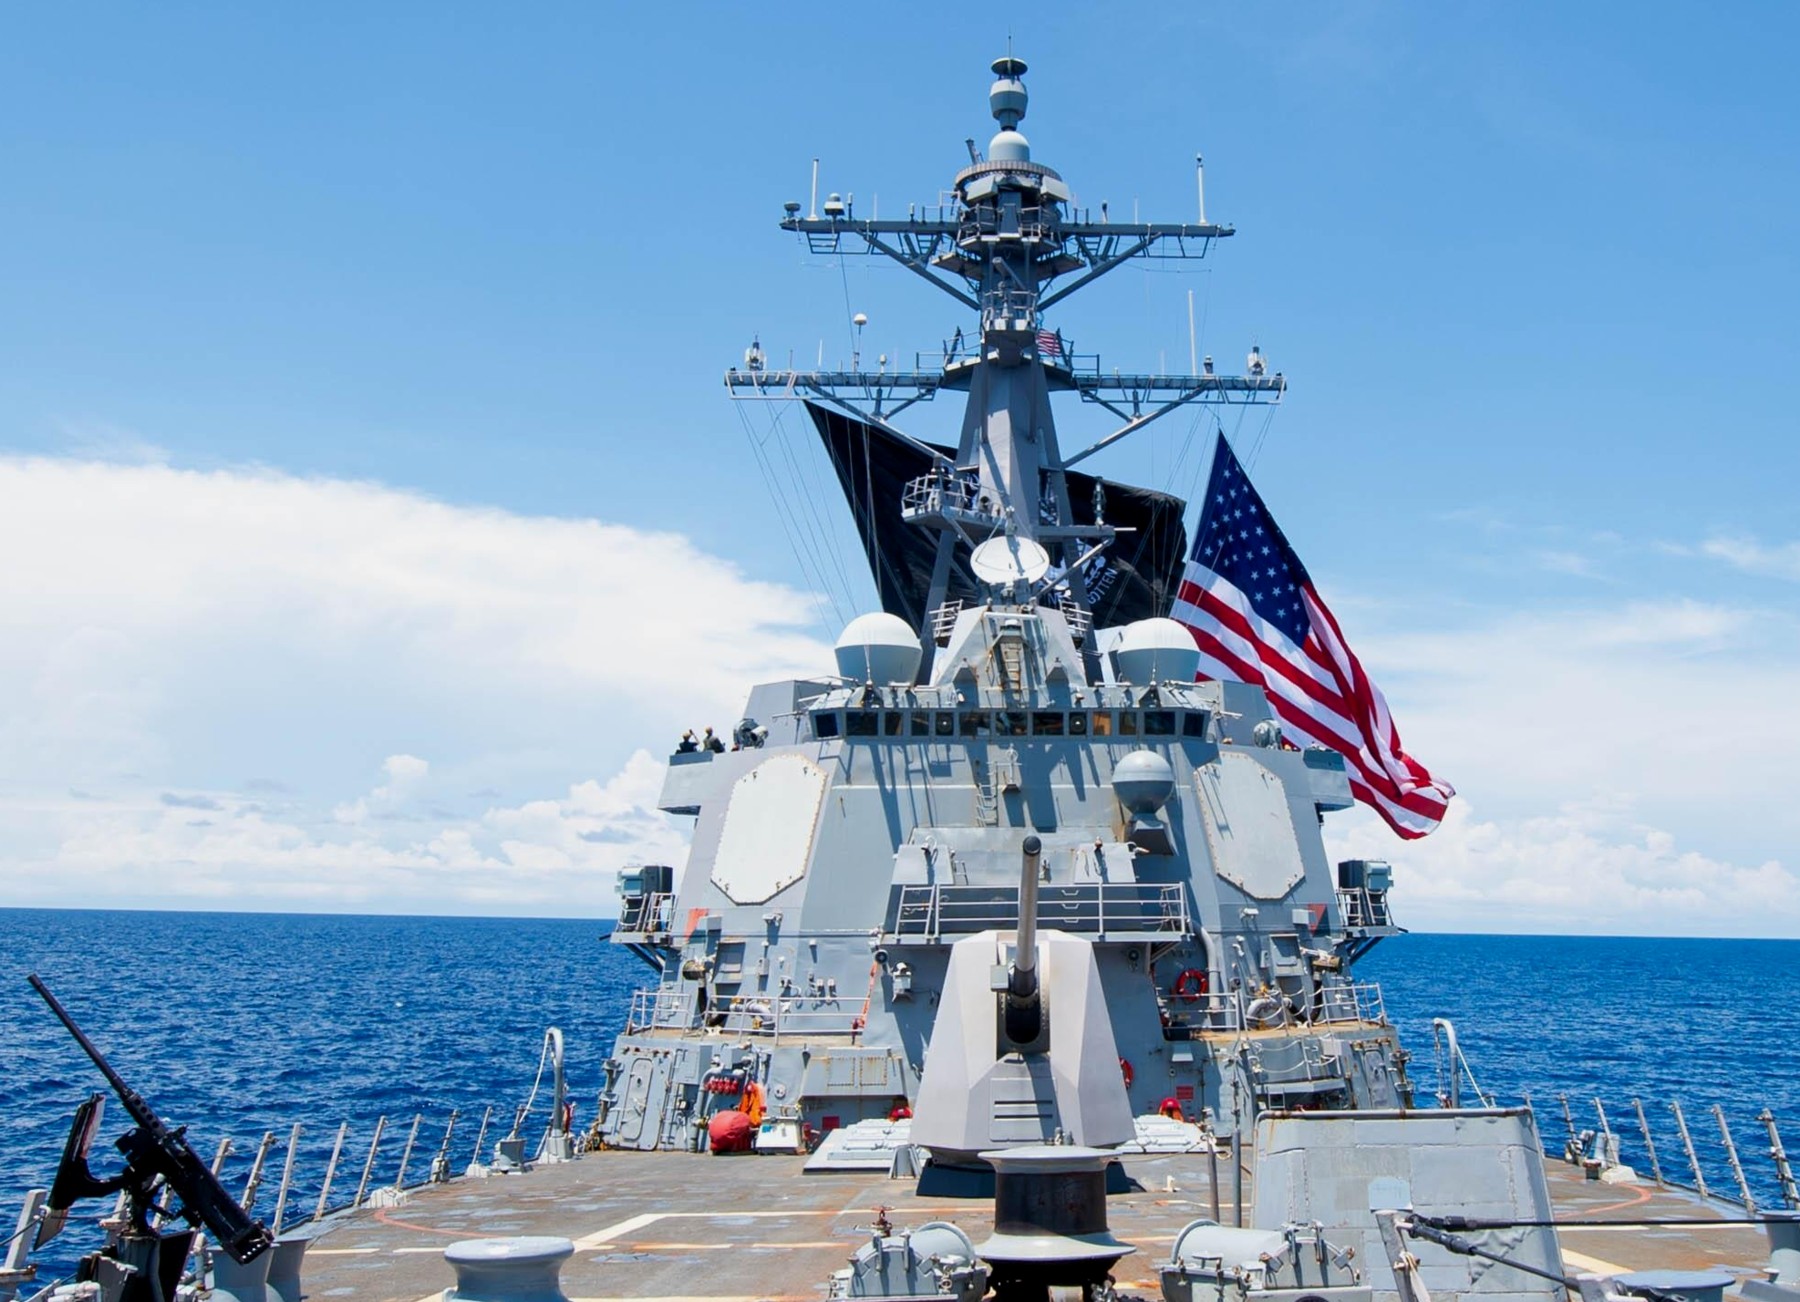 ddg-110 uss william p. lawrence arleigh burke class guided missile destroyer aegis us navy caribbean sea 63